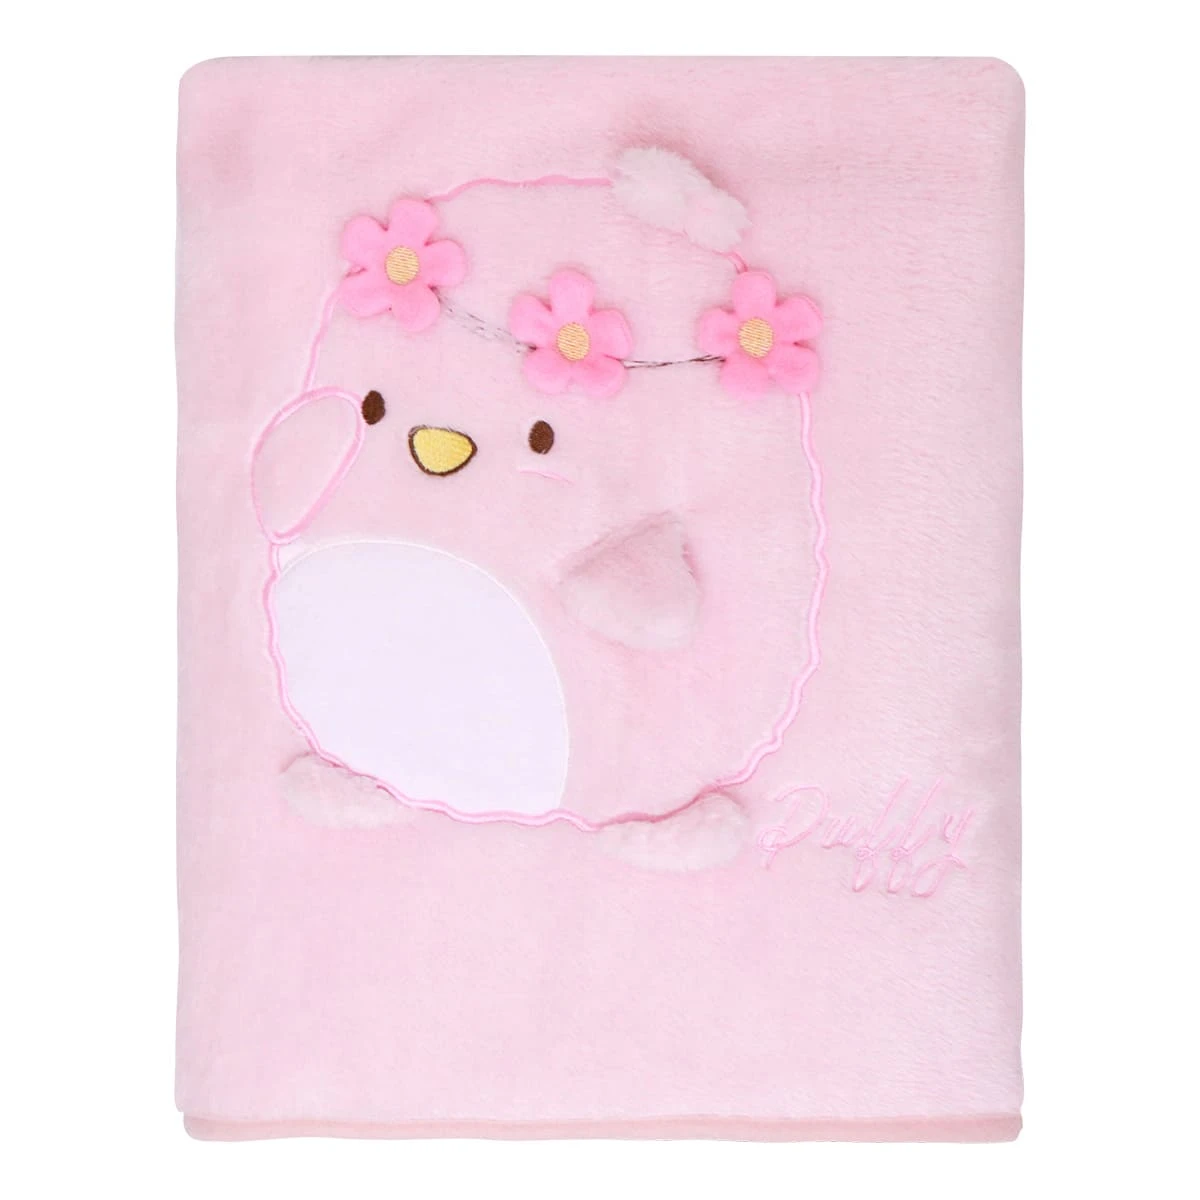 Puffy 3D Embroidery Recycled Plush Baby Blanket (Pink)